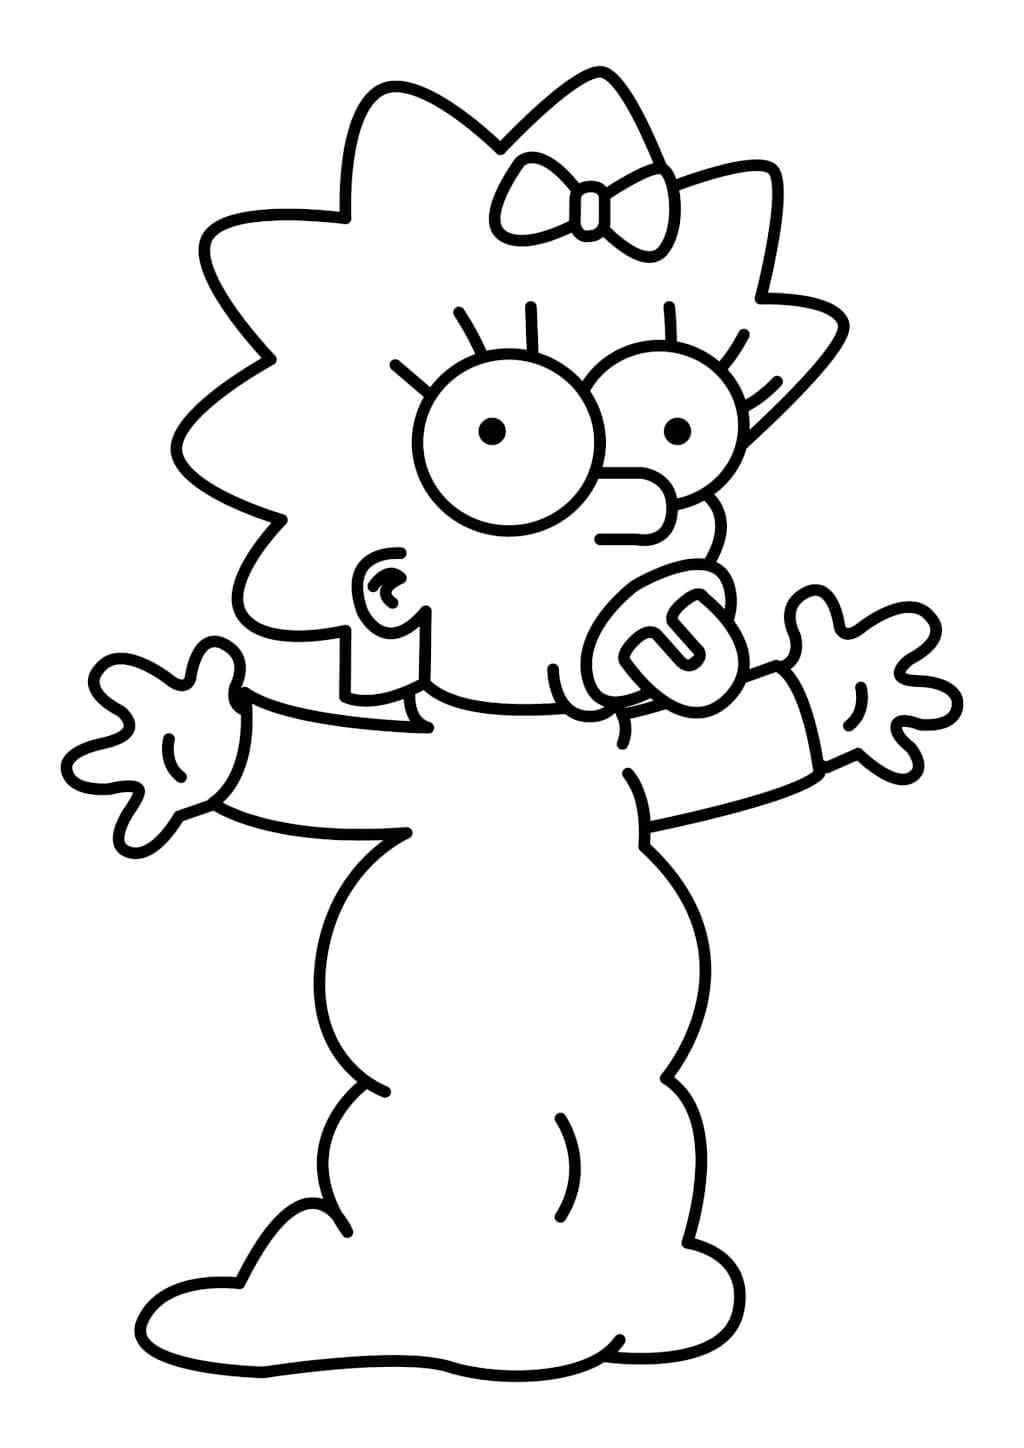 The Smallest Member Of The Simpsons Family